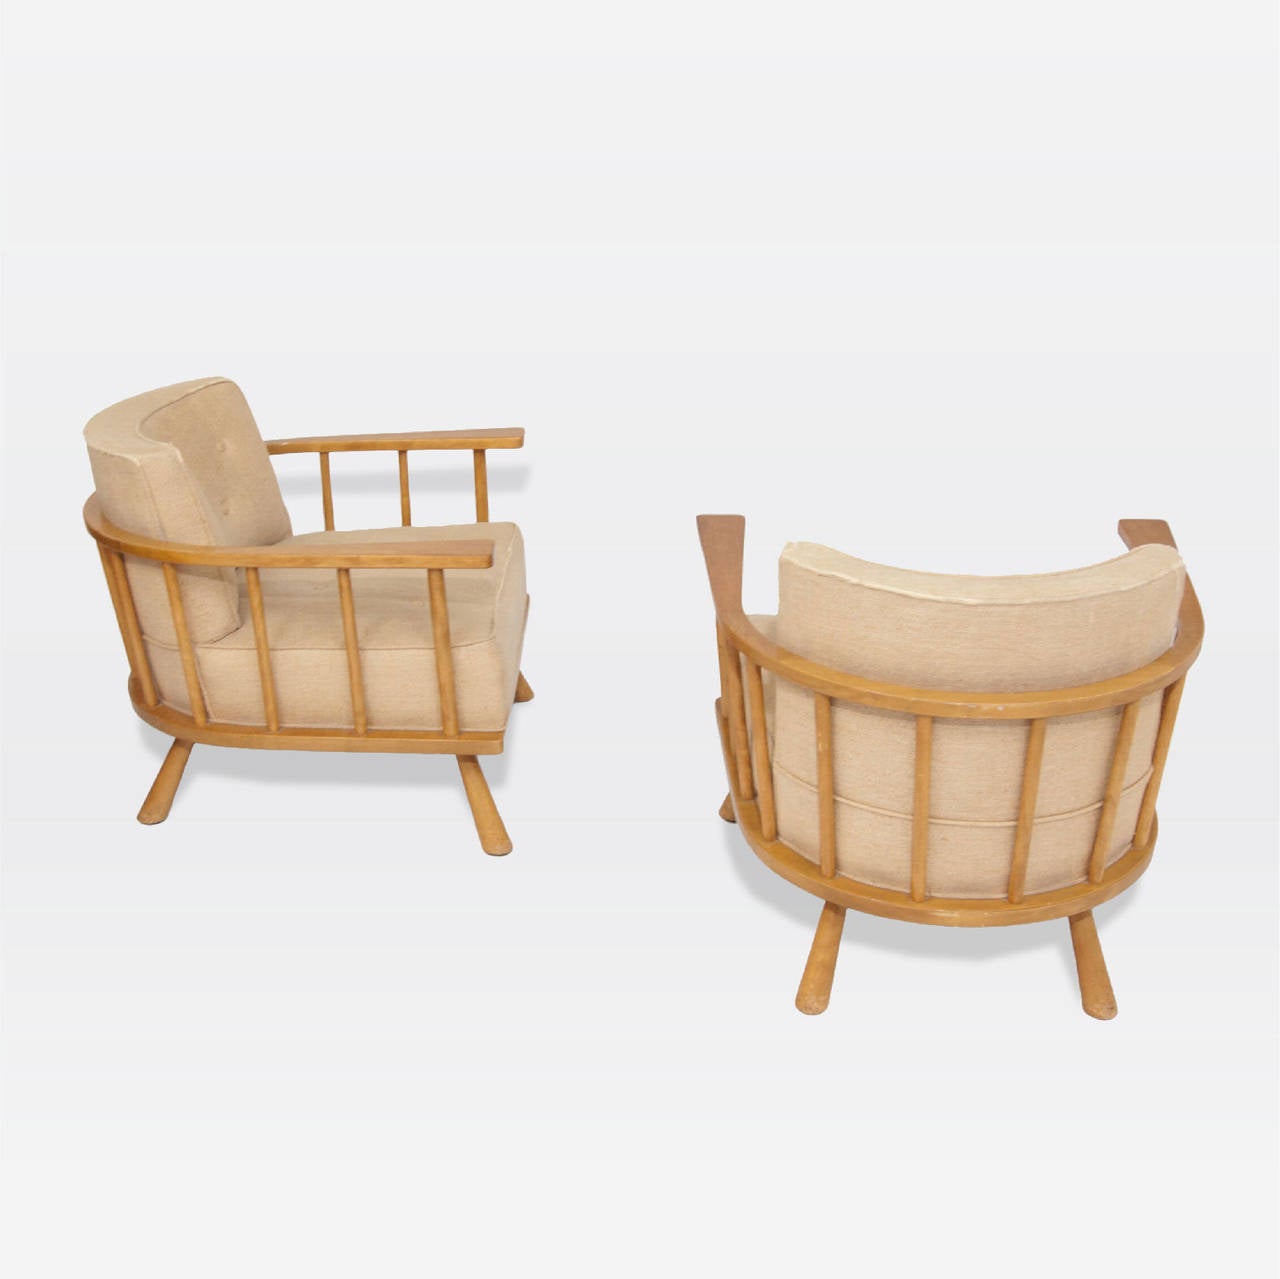 Pair of arm barrel back chairs, vertical slats, beige upholstery designed for Widdicomb.